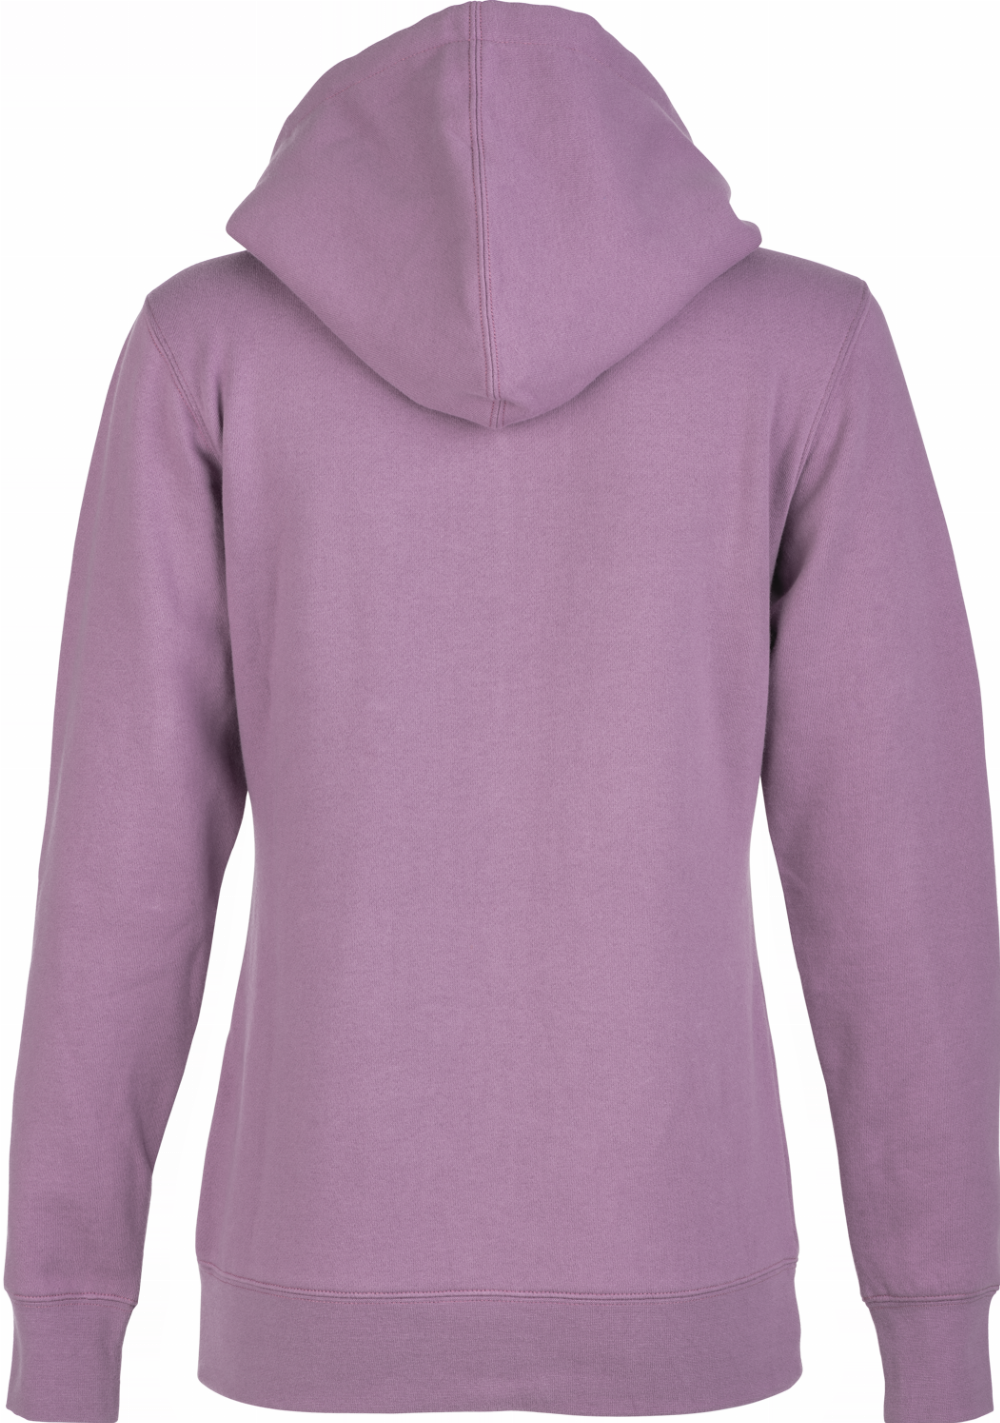 WOMEN'S FLY CORPORATE ZIP UP HOODIE MAUVE MD#mpn_358-0062M